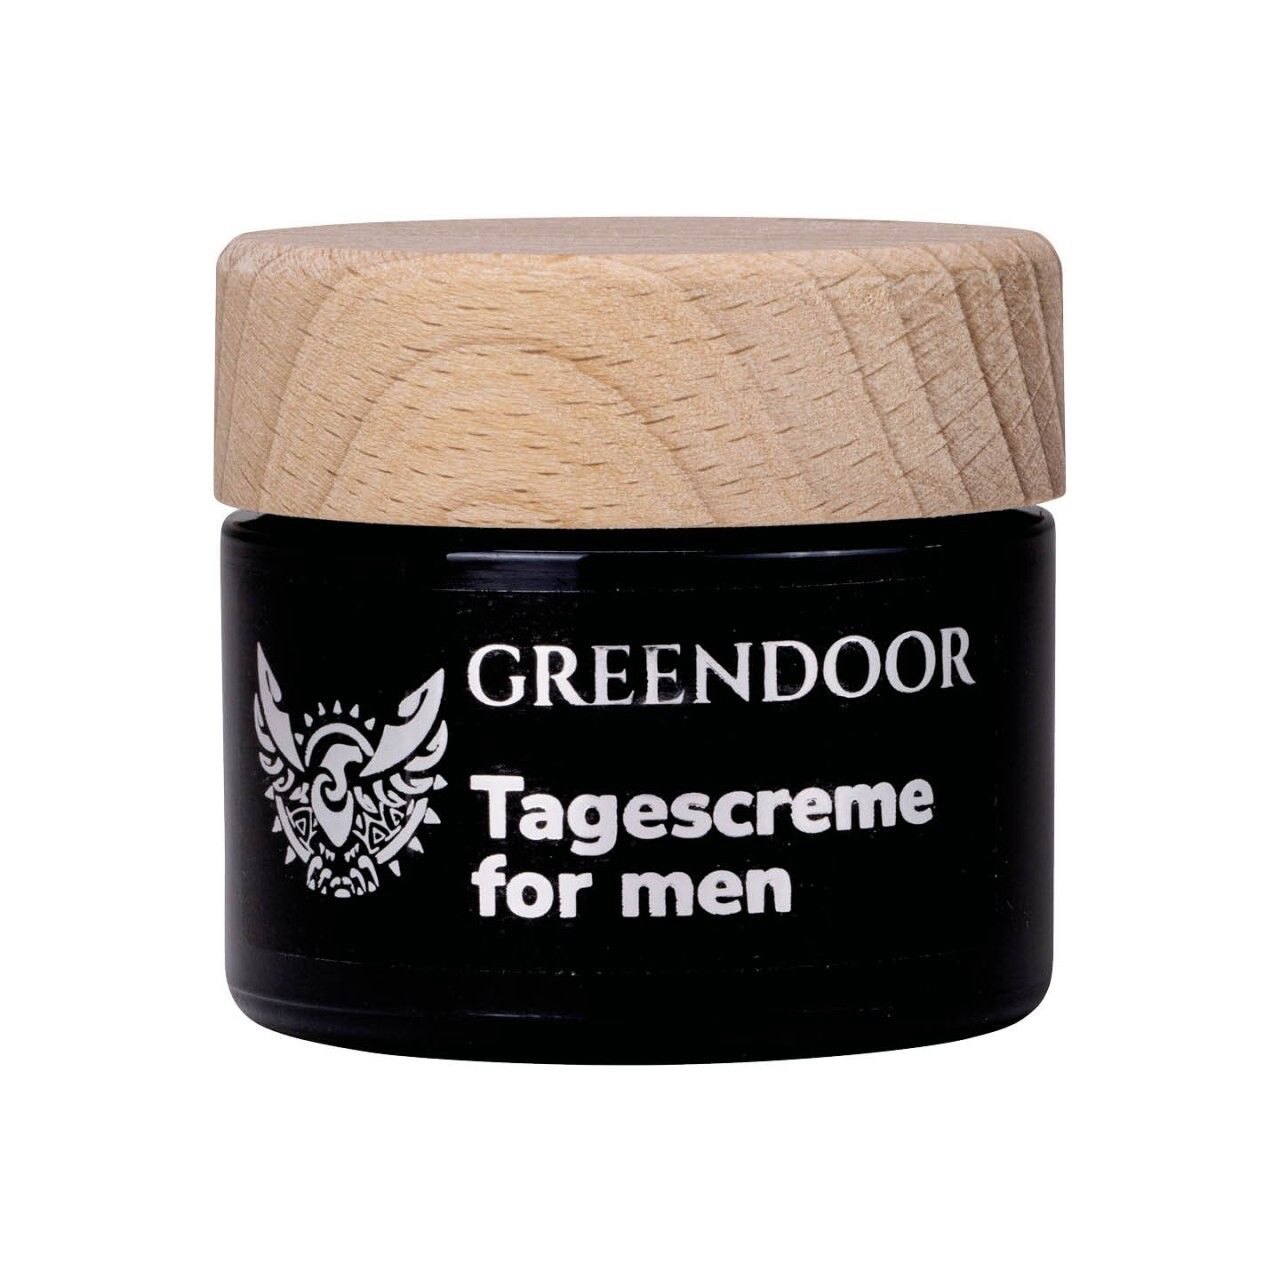 Tagescreme for men